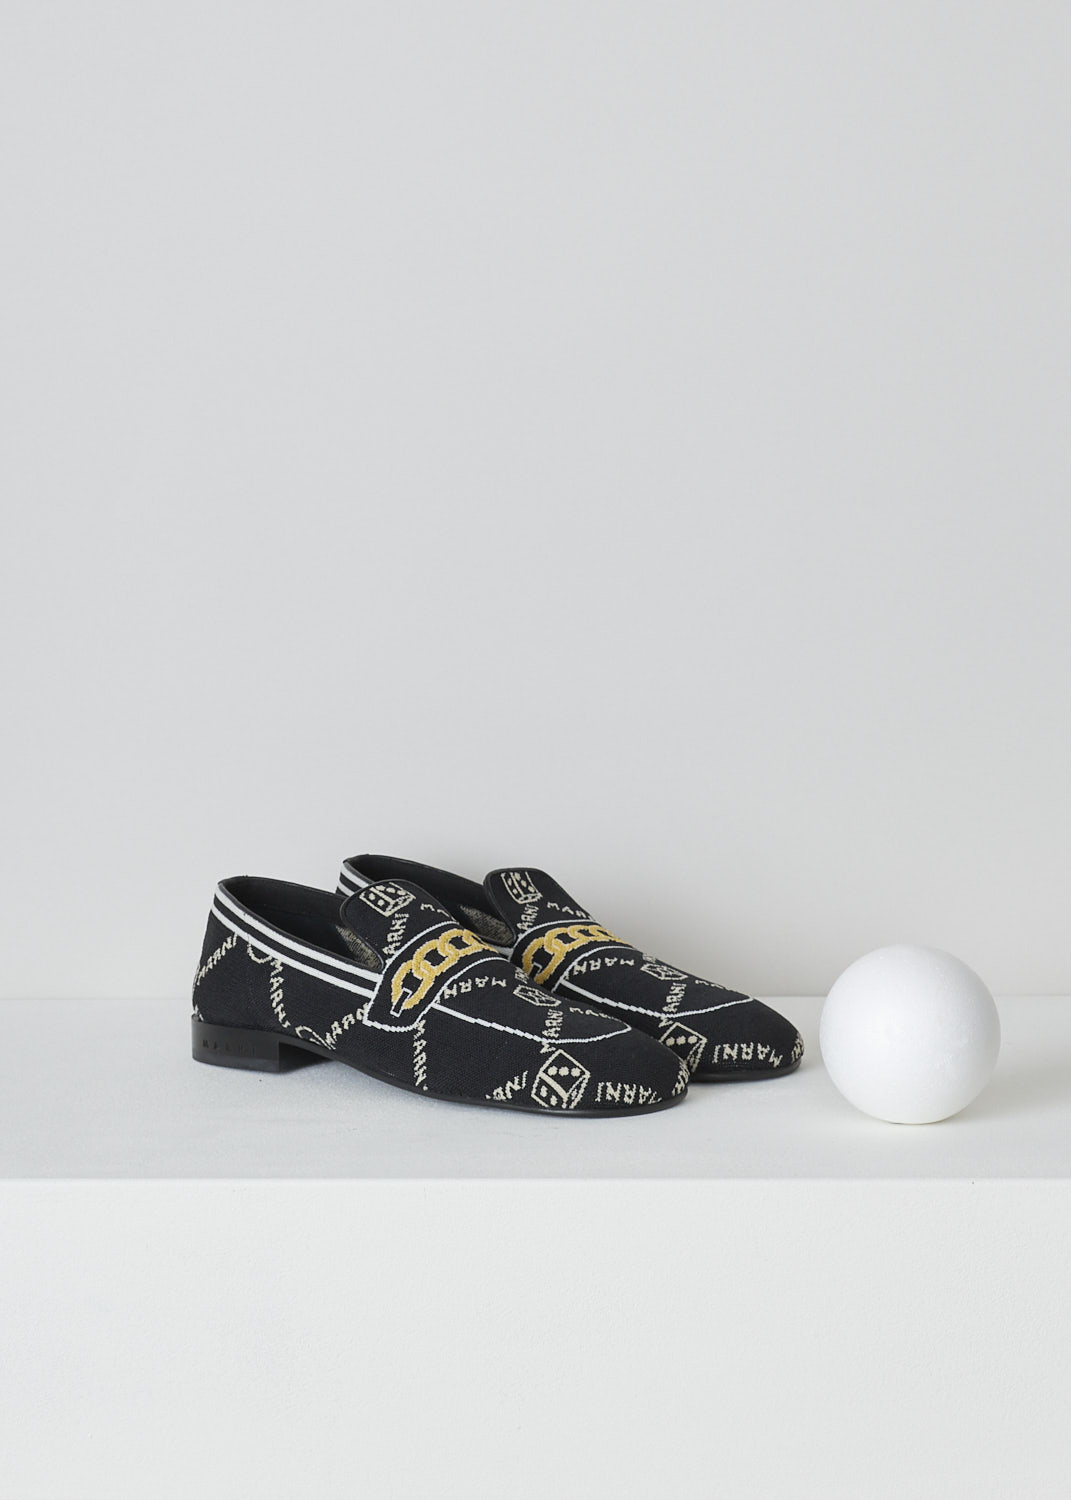 MARNI, BLACK TROMPE L'OEIL JACQUARD MOCCASINS, MOMS003601_P4601_Z2Q23, Black, Front, These black knitted moccasins have a trompe l'oeil image woven into them which depicts a gold chain across the vamp. The brand's logo is woven into them throughout the shoe in white. These moccasins have a round toe and flat rubber sole with a small heel. 
